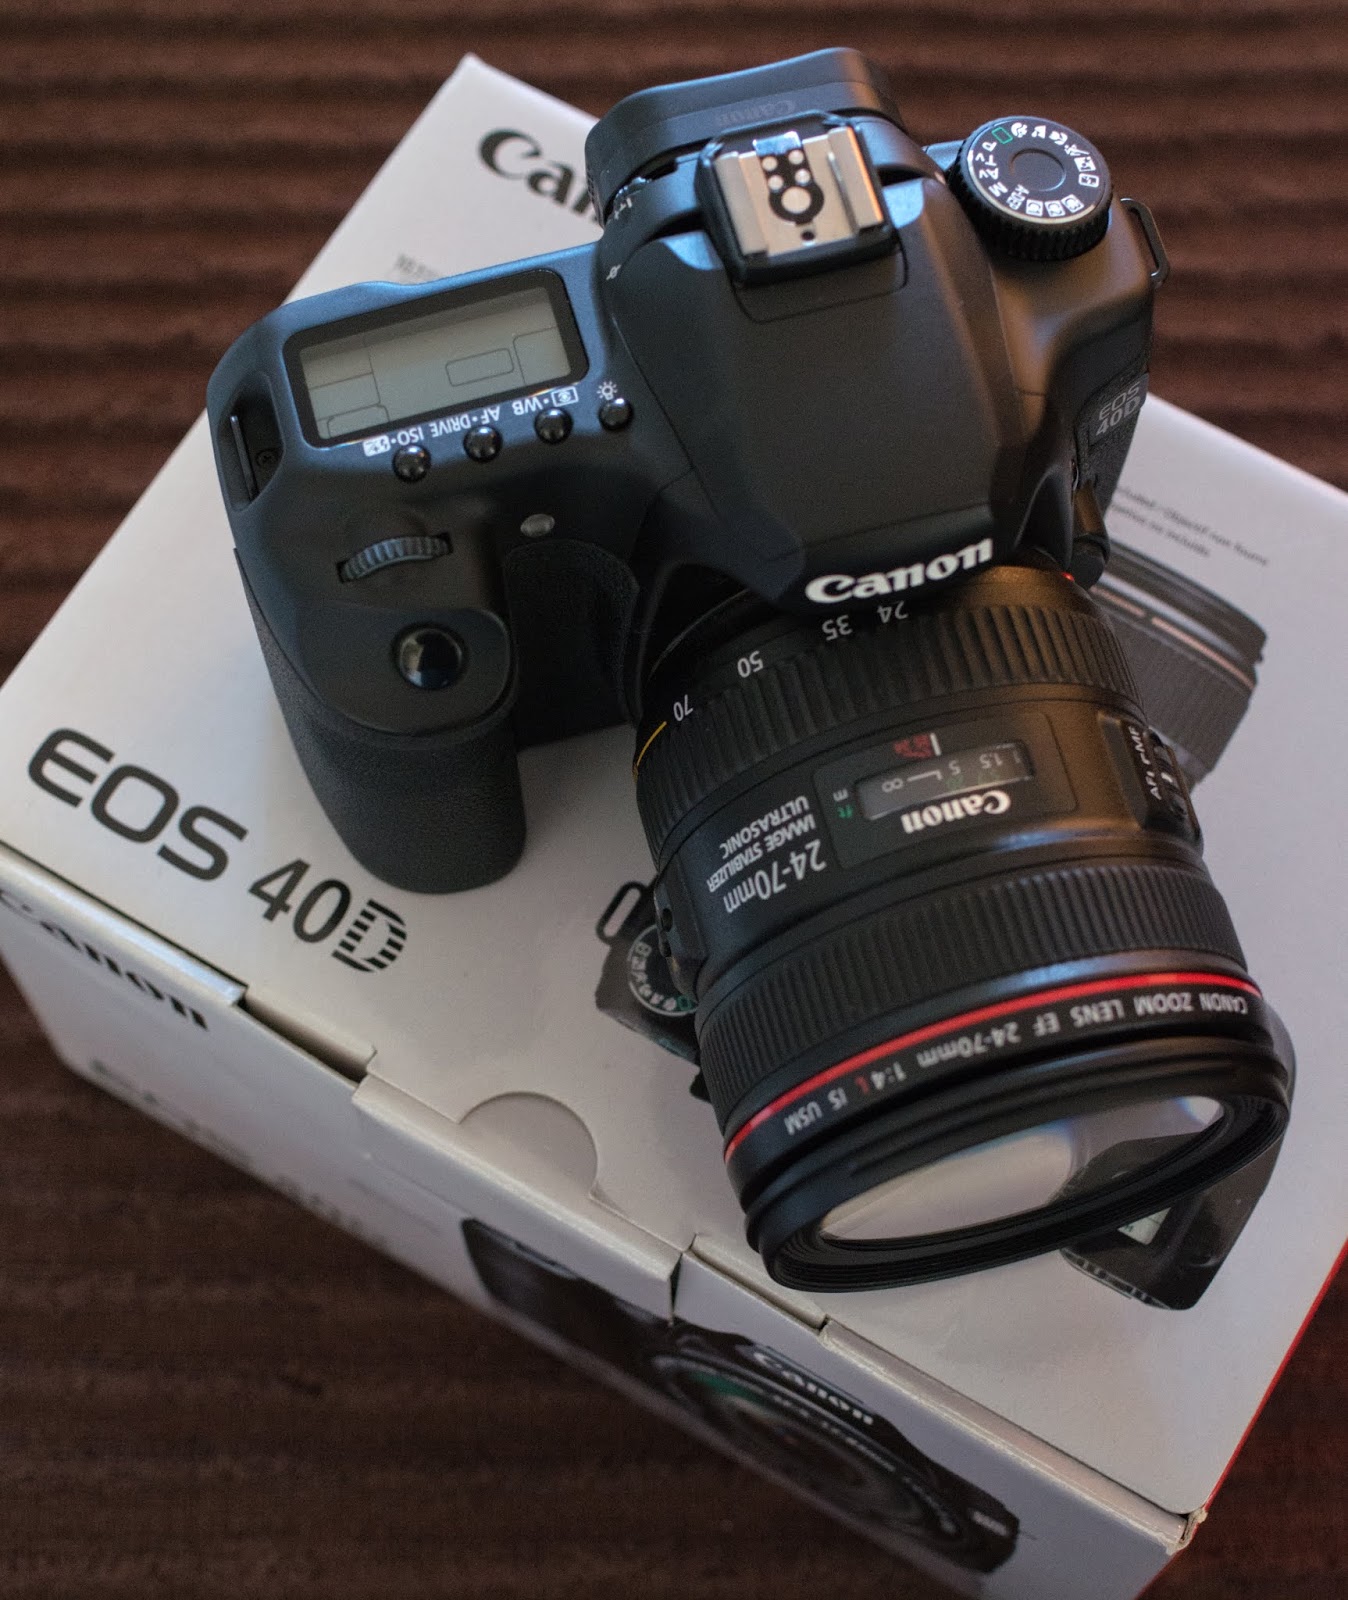 PHOTOGRAPHIC CENTRAL: Photography Fundamentals on a Budget - Canon EOS 40D